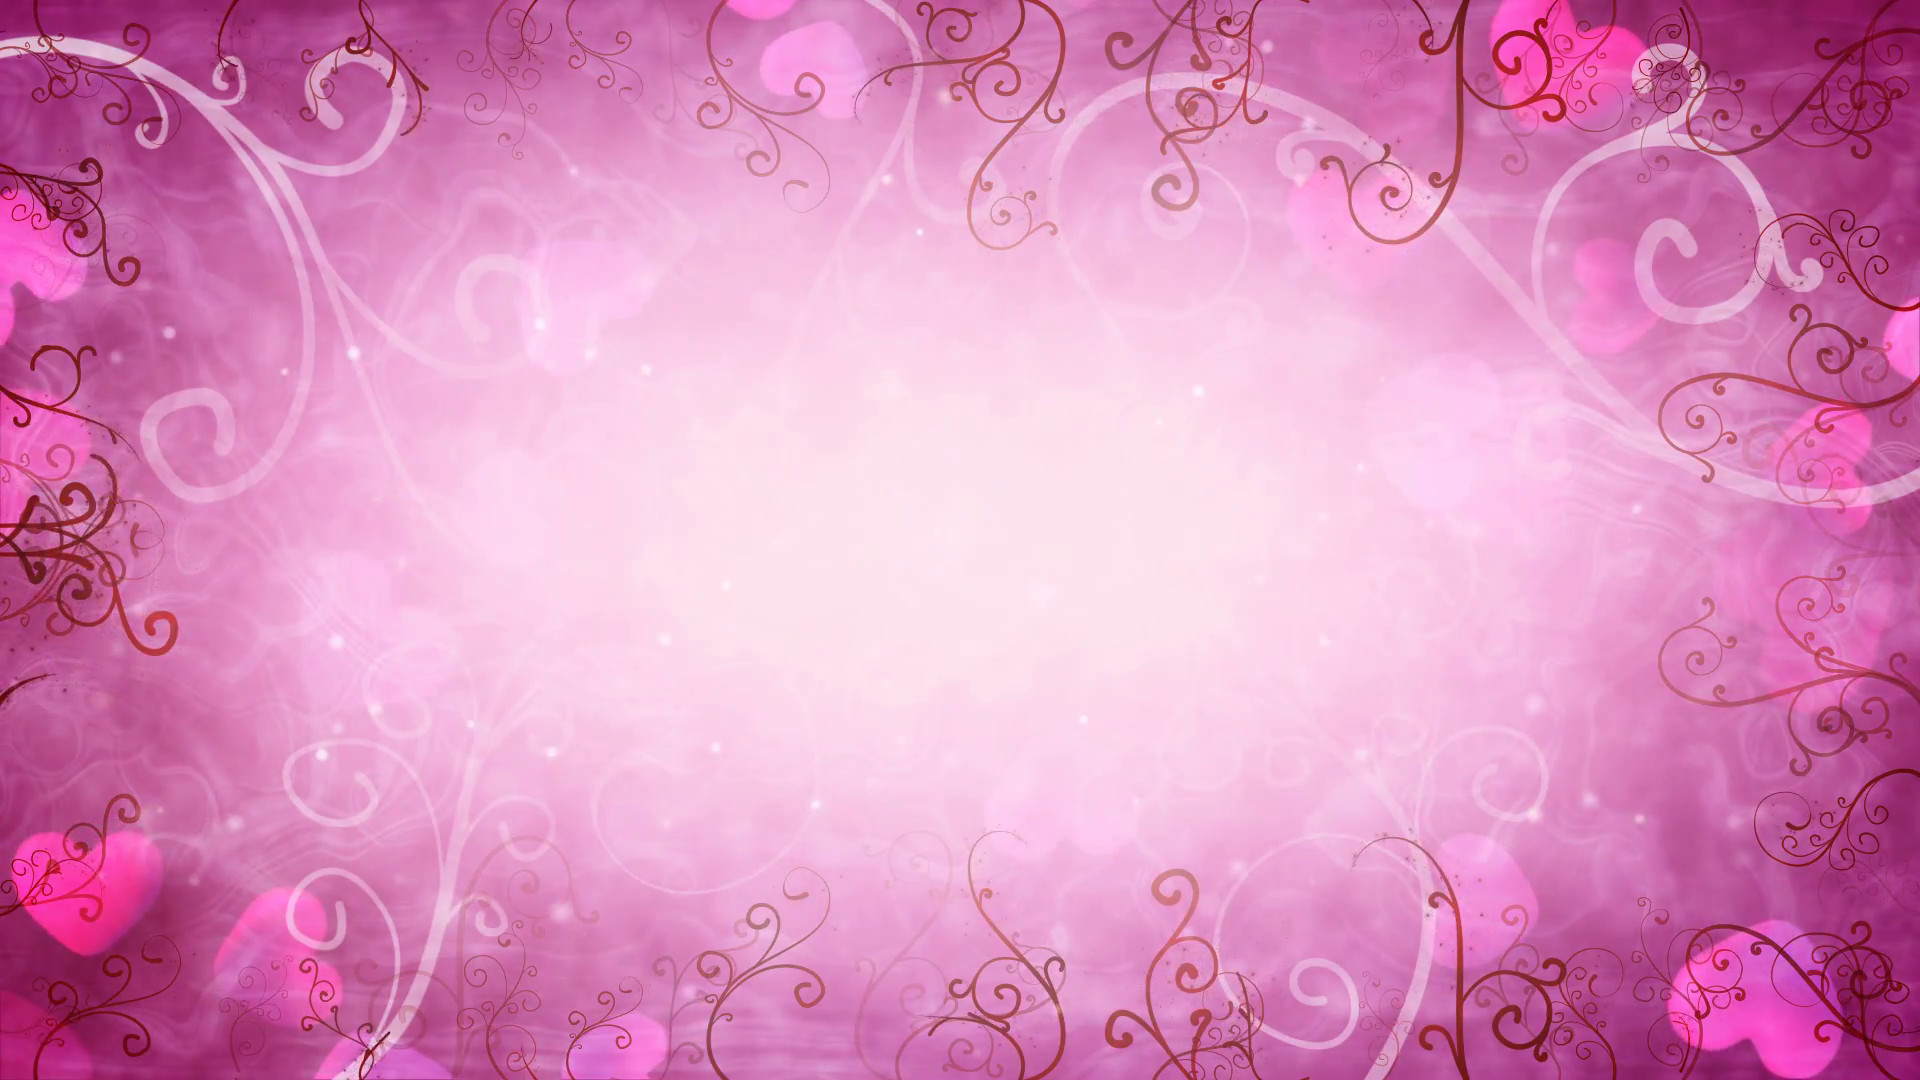 1920x1080 hearts and flourishes loop romantic background